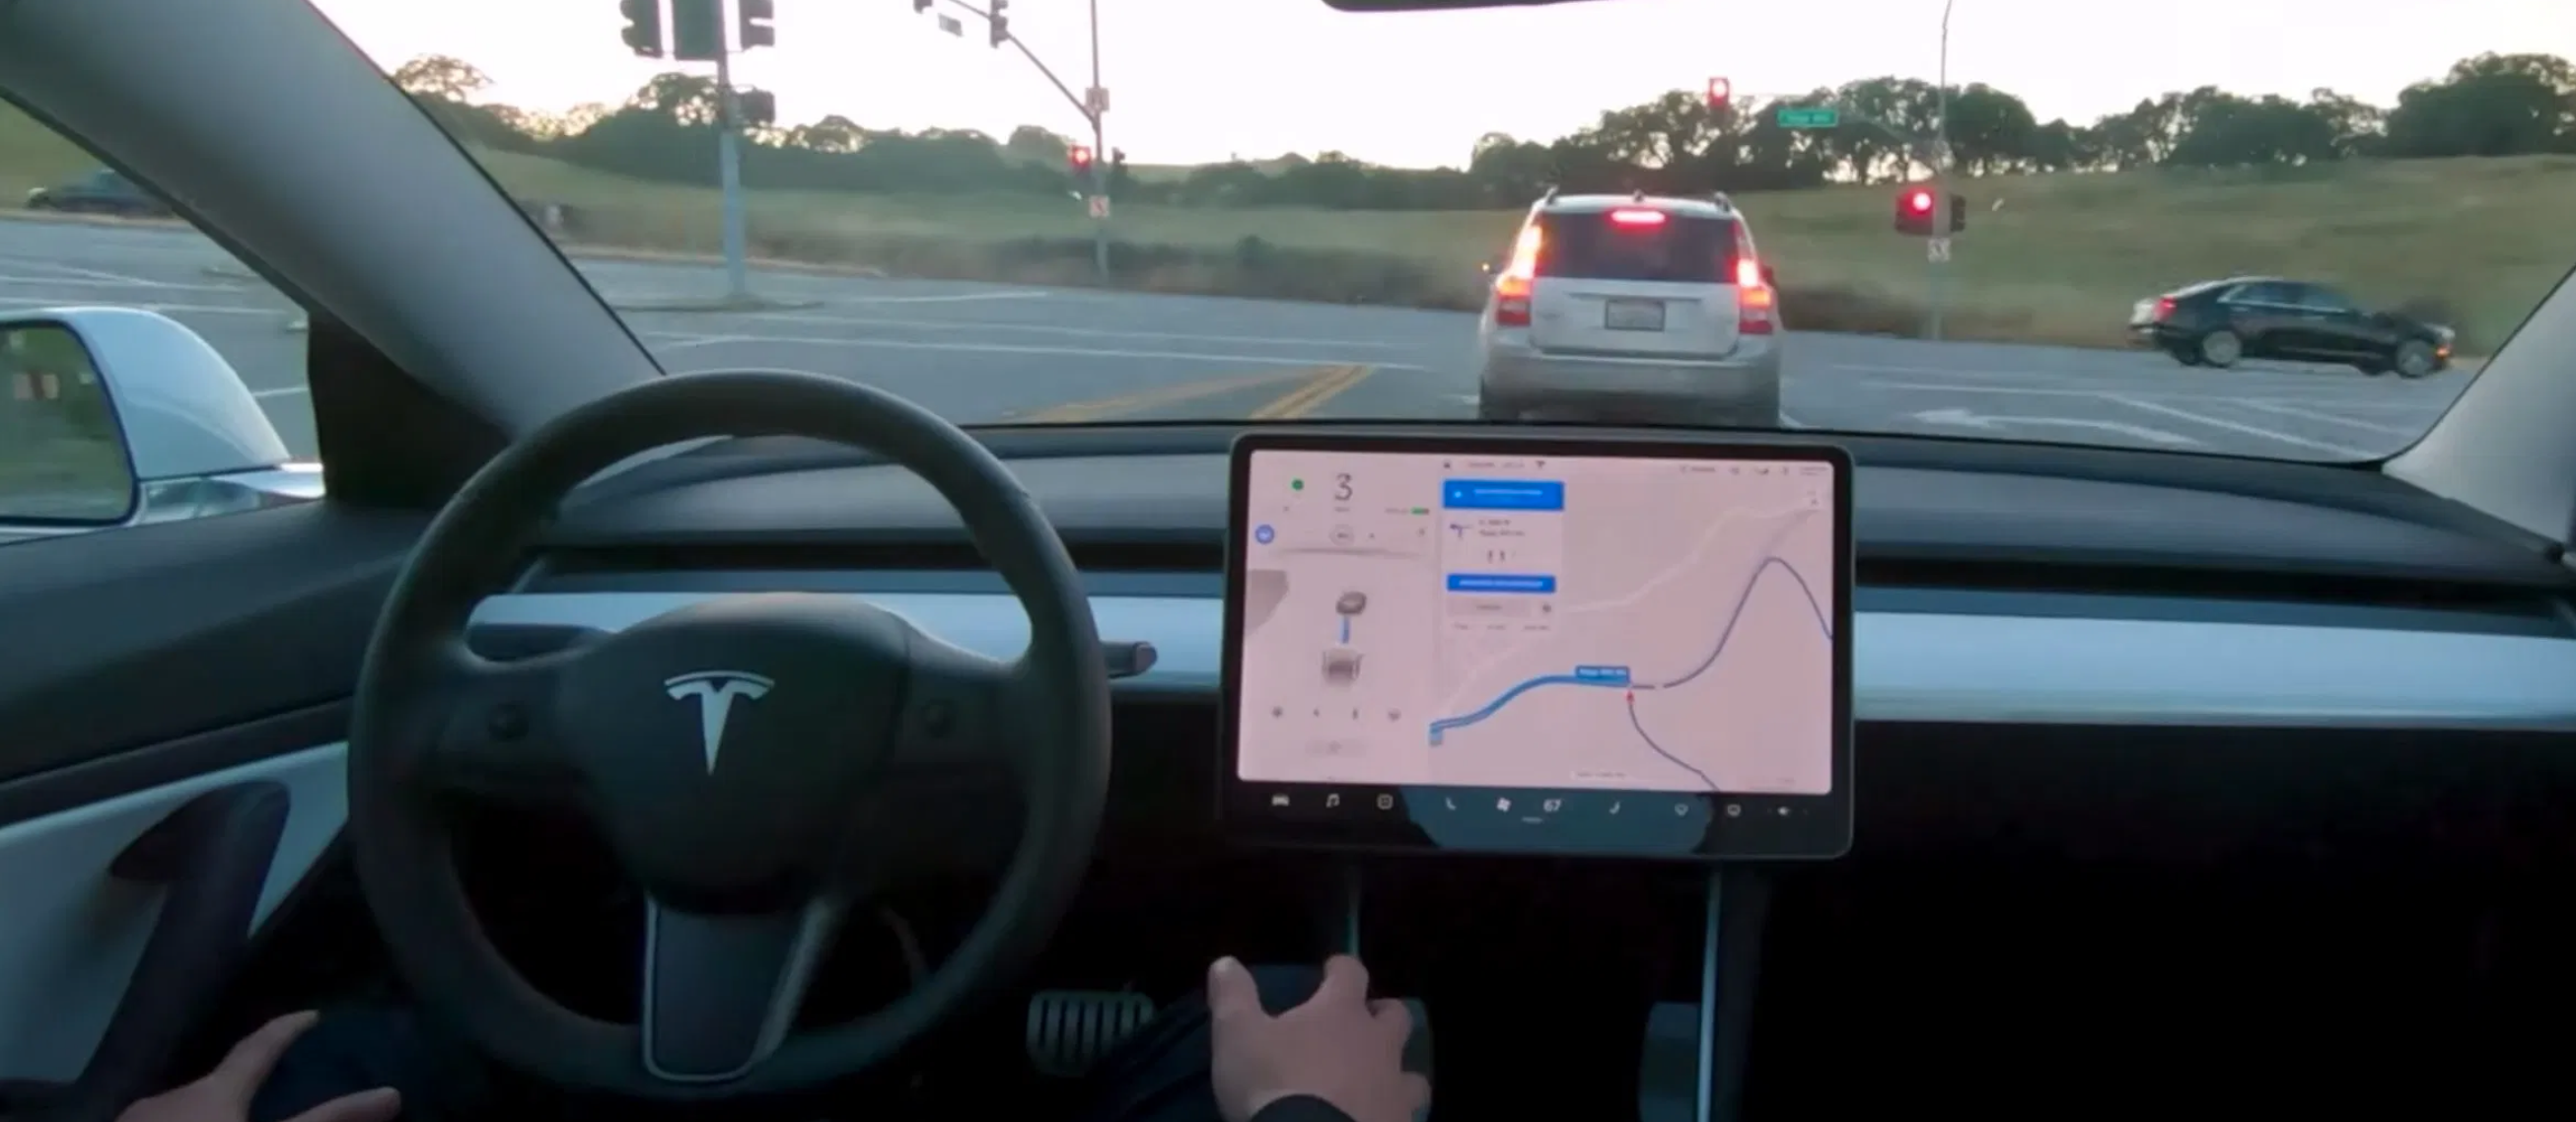 Elon Musk: Tesla will achieve full autonomous driving in some areas next year.